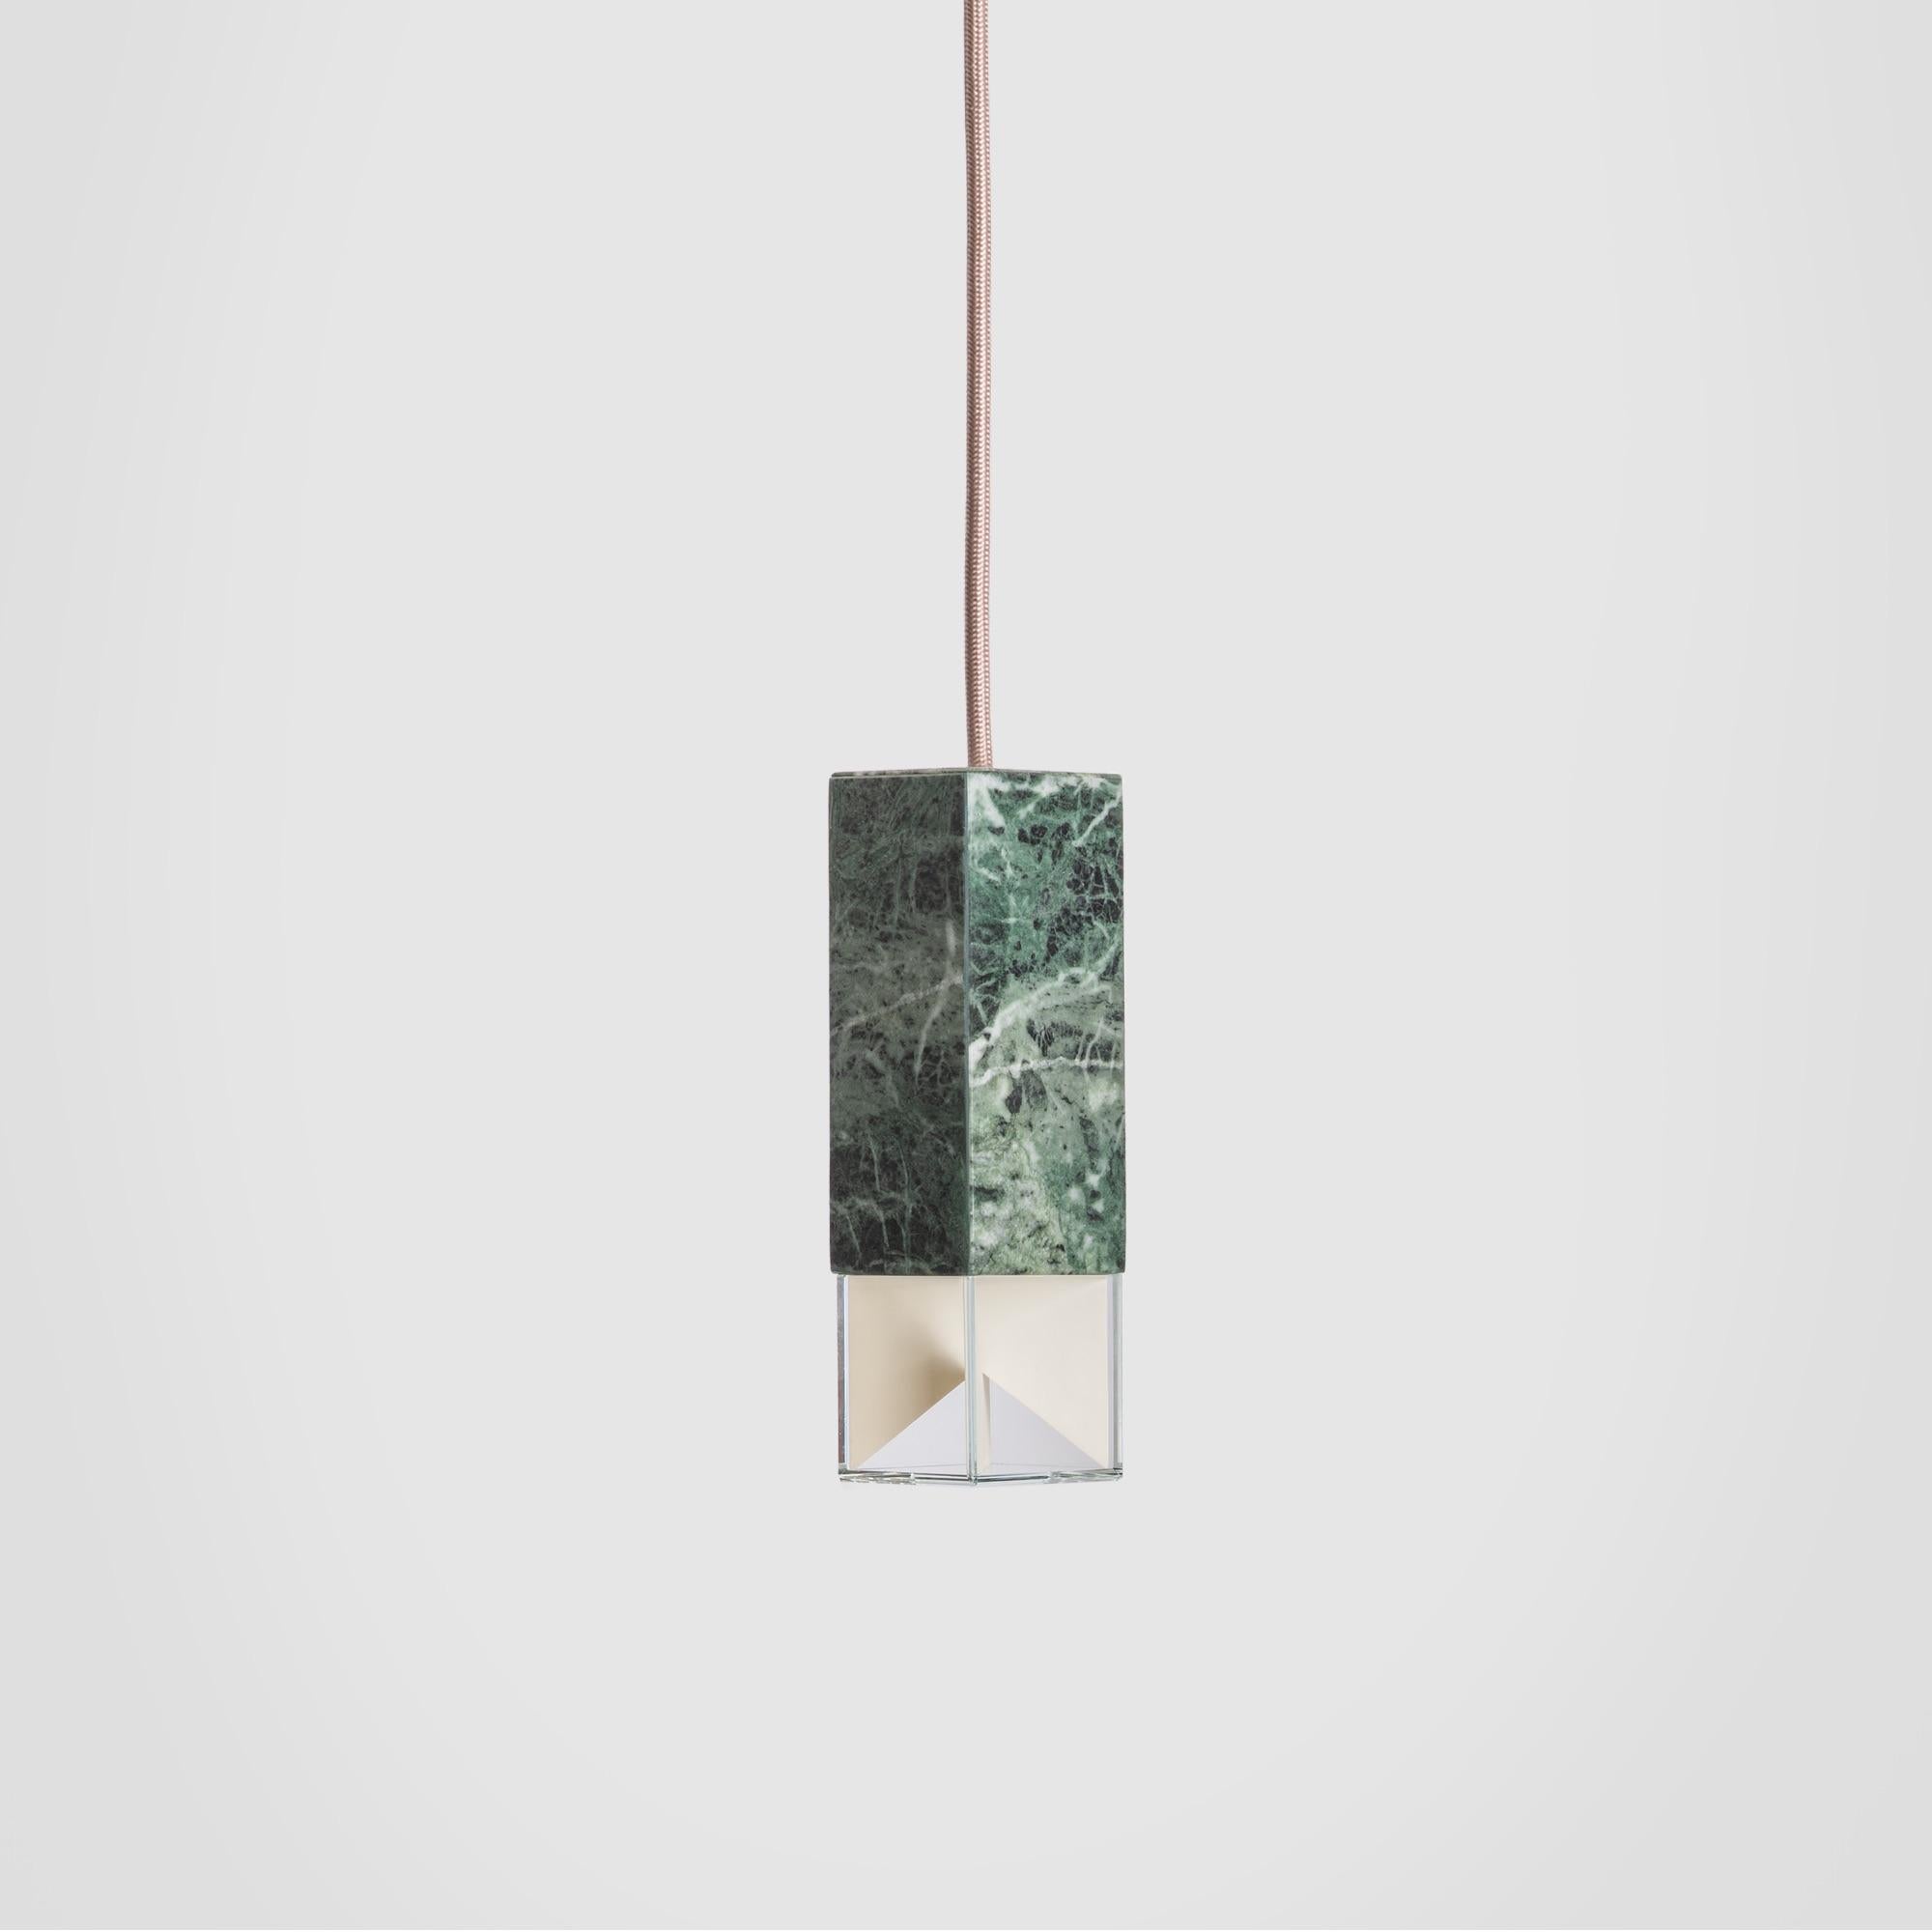 About
Contemporary Pendant Light Handcrafted in Green Marble by Formaminima

Lamp/One Green from Colour Edition
Design by Formaminima
Single Pendant
Materials:
Body lamp handcrafted in translucent marble Green Alps / crystal glass diffuser hosting